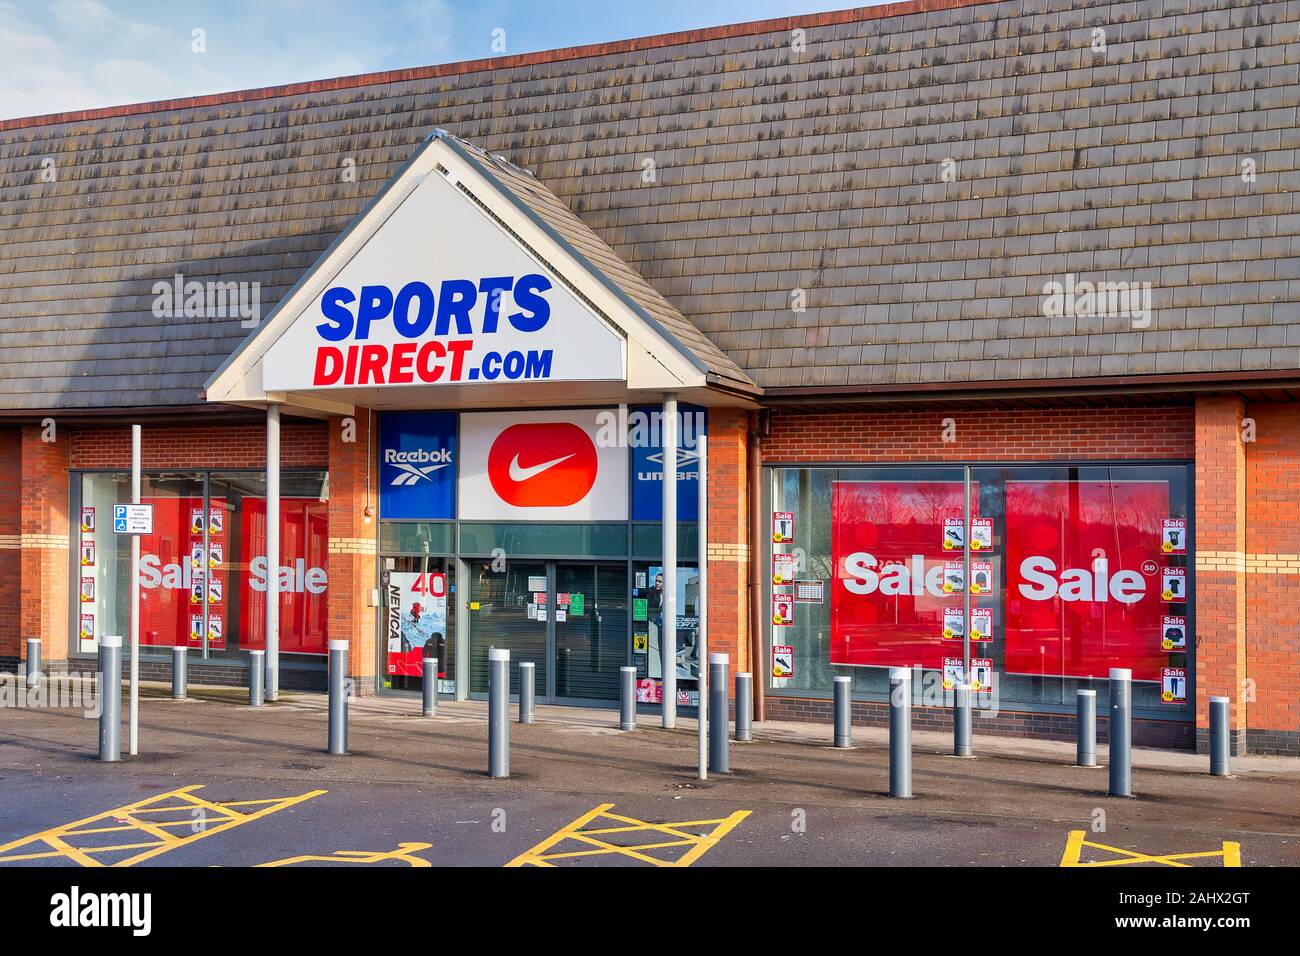 WREXHAM, UNITED KINGDOM - DECEMBER 25th, 2019: Sports Direct superstore store front Stock Photo